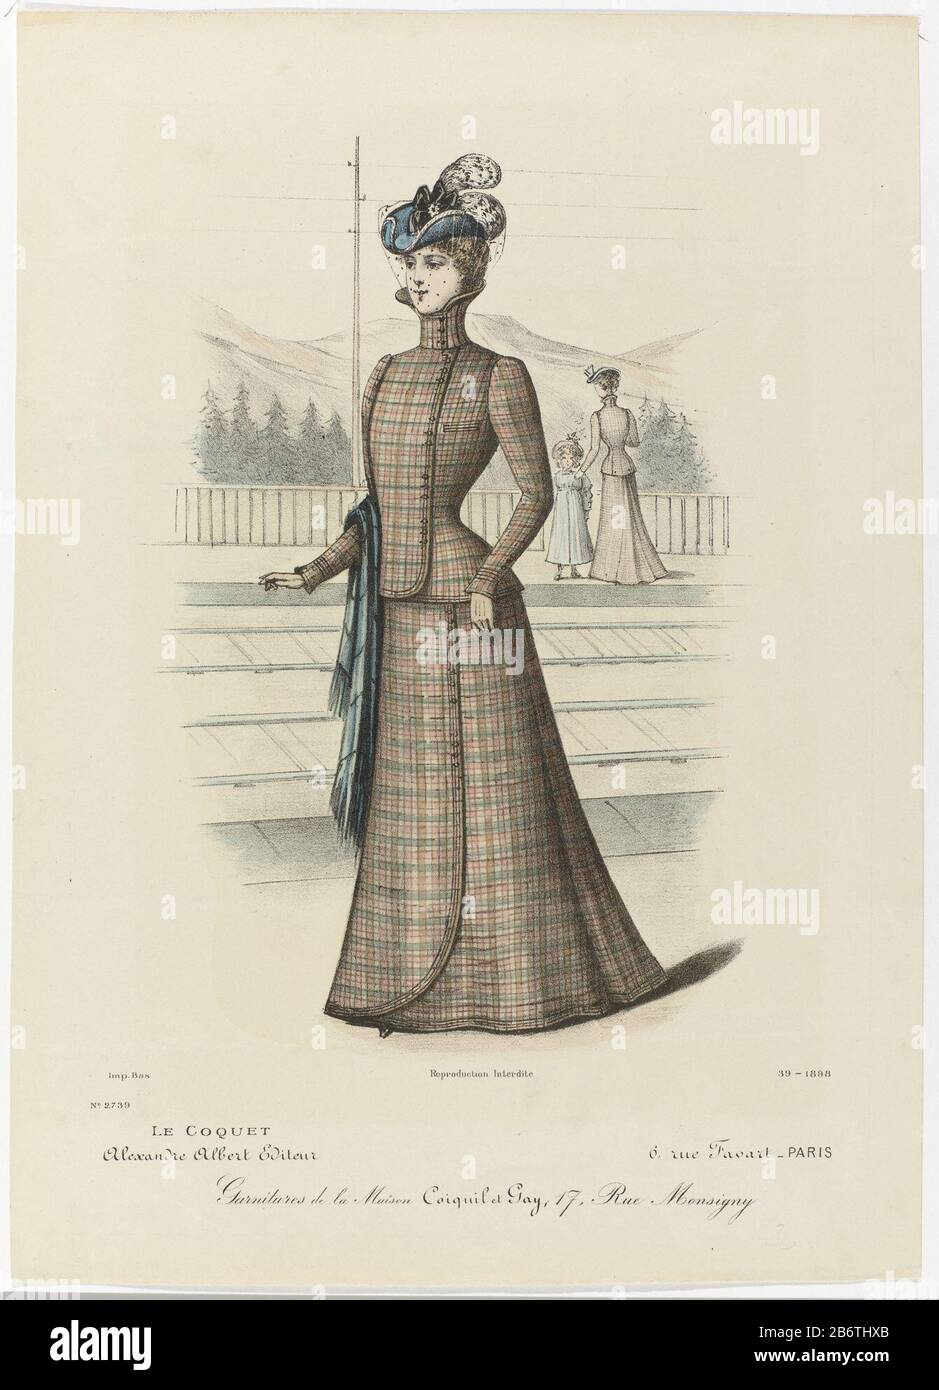 Het eerste mantelpak Le Coquet, 1898, No 2739, Nr 39 Garnitures de la  Maison M, standing on a platform, dressed in a" tailor toilette 'consisting  of a checkered jacket with collar and